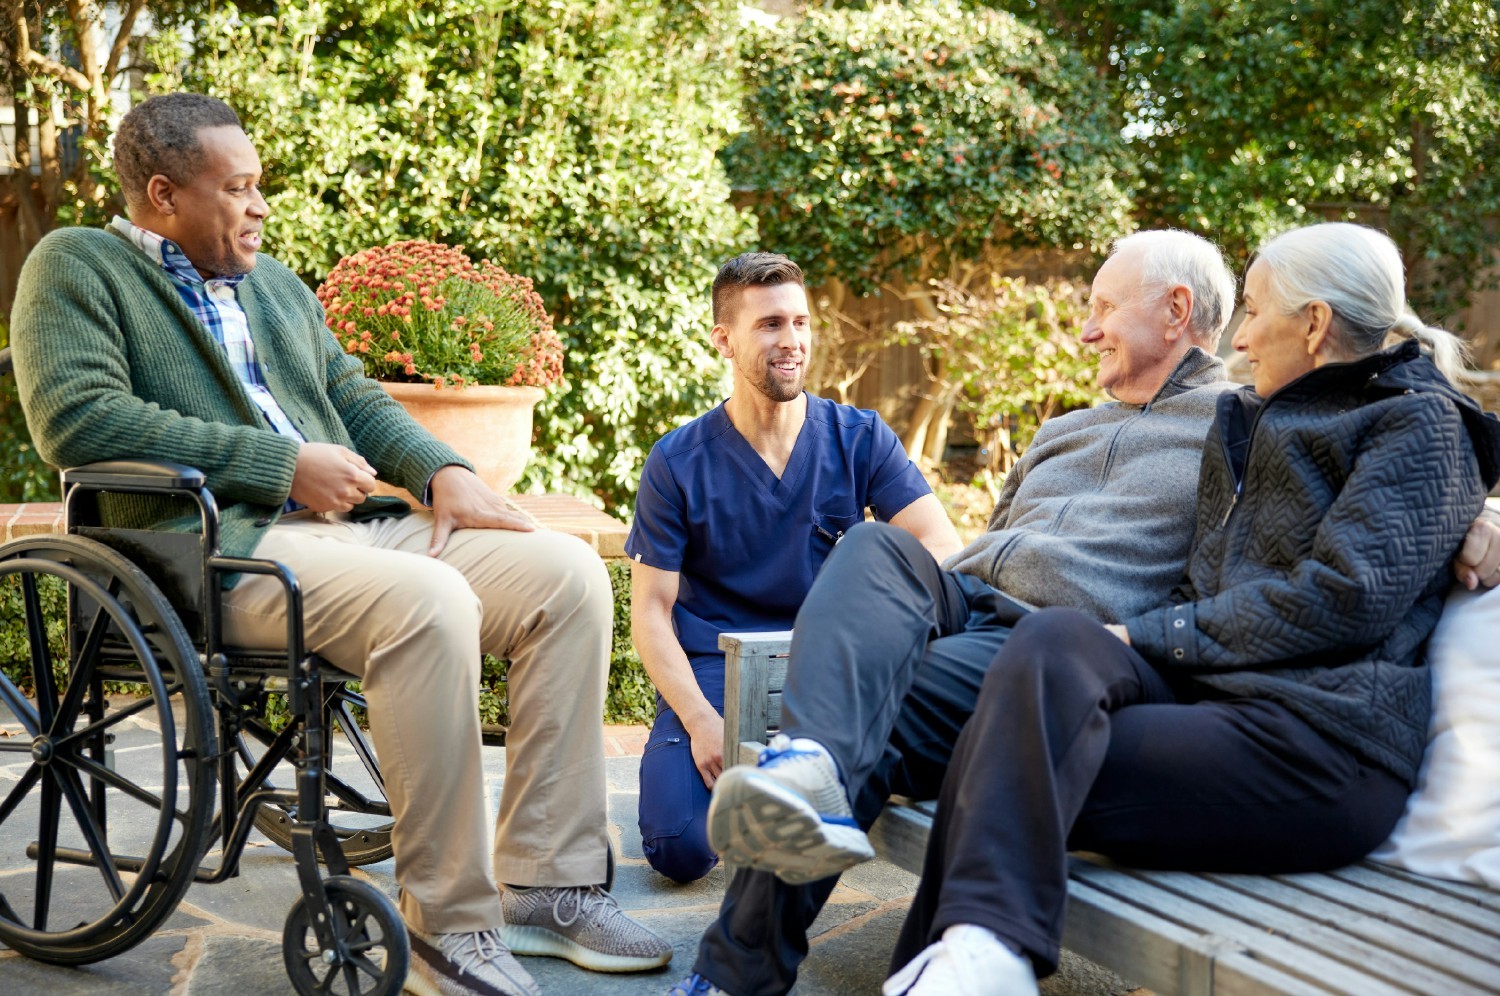 Our Rehab therapy professionals support older adults across the continuum.